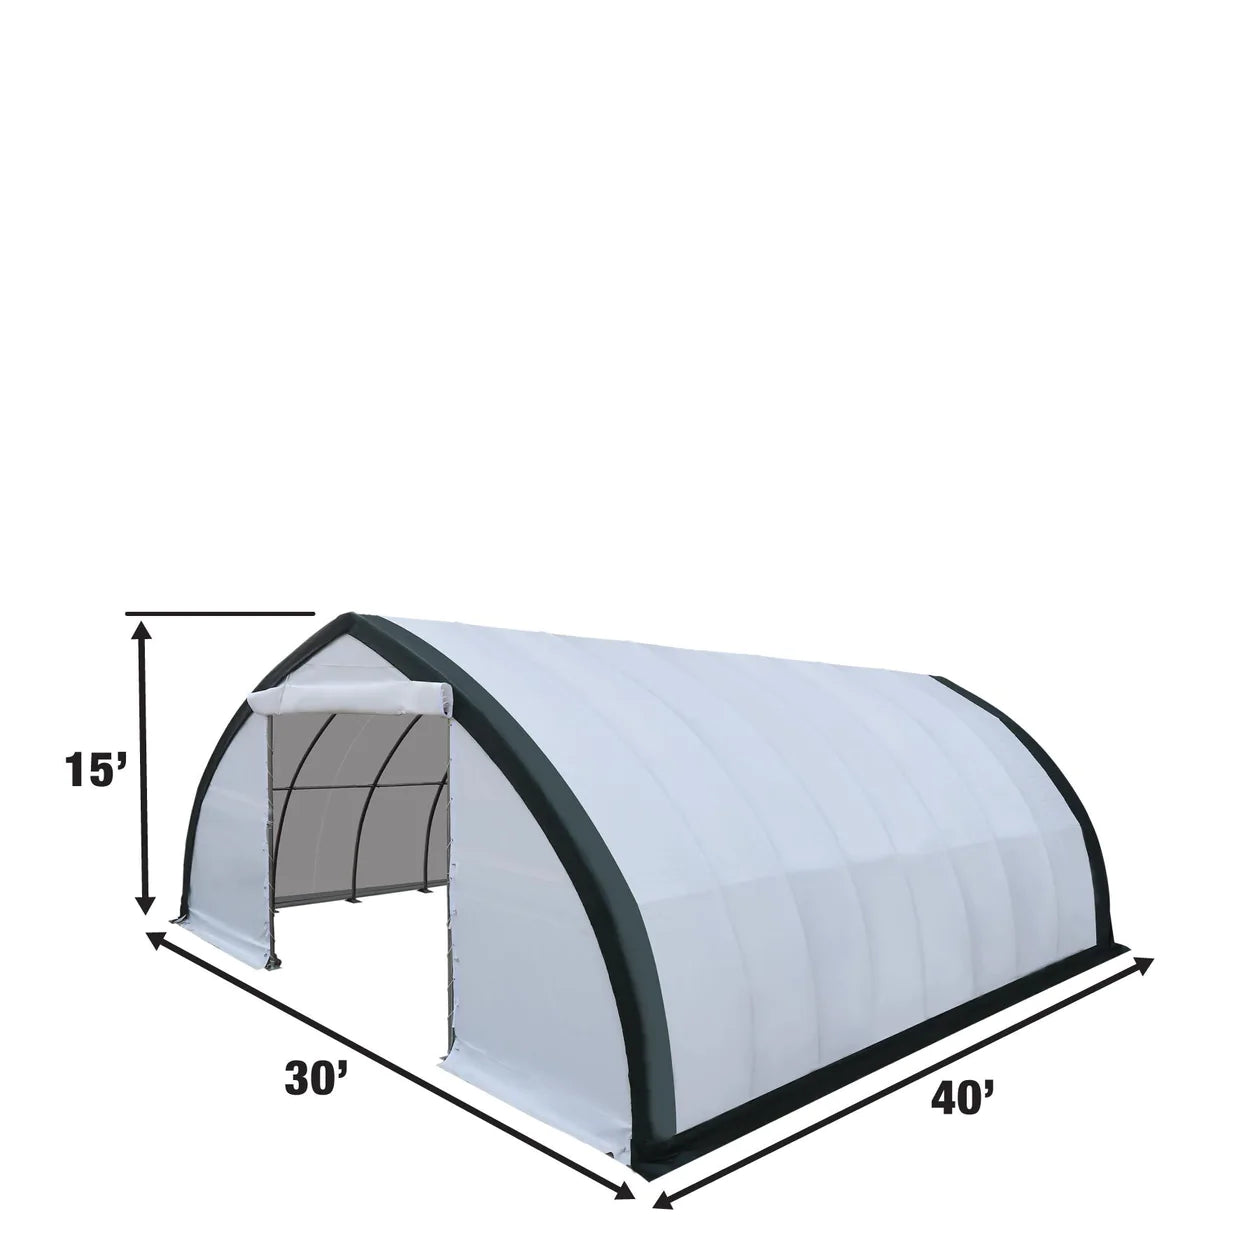 New 30' x 40' Peak Ceiling Storage Shelter with Heavy Duty 11 oz PE Cover &  Drive Through Doors